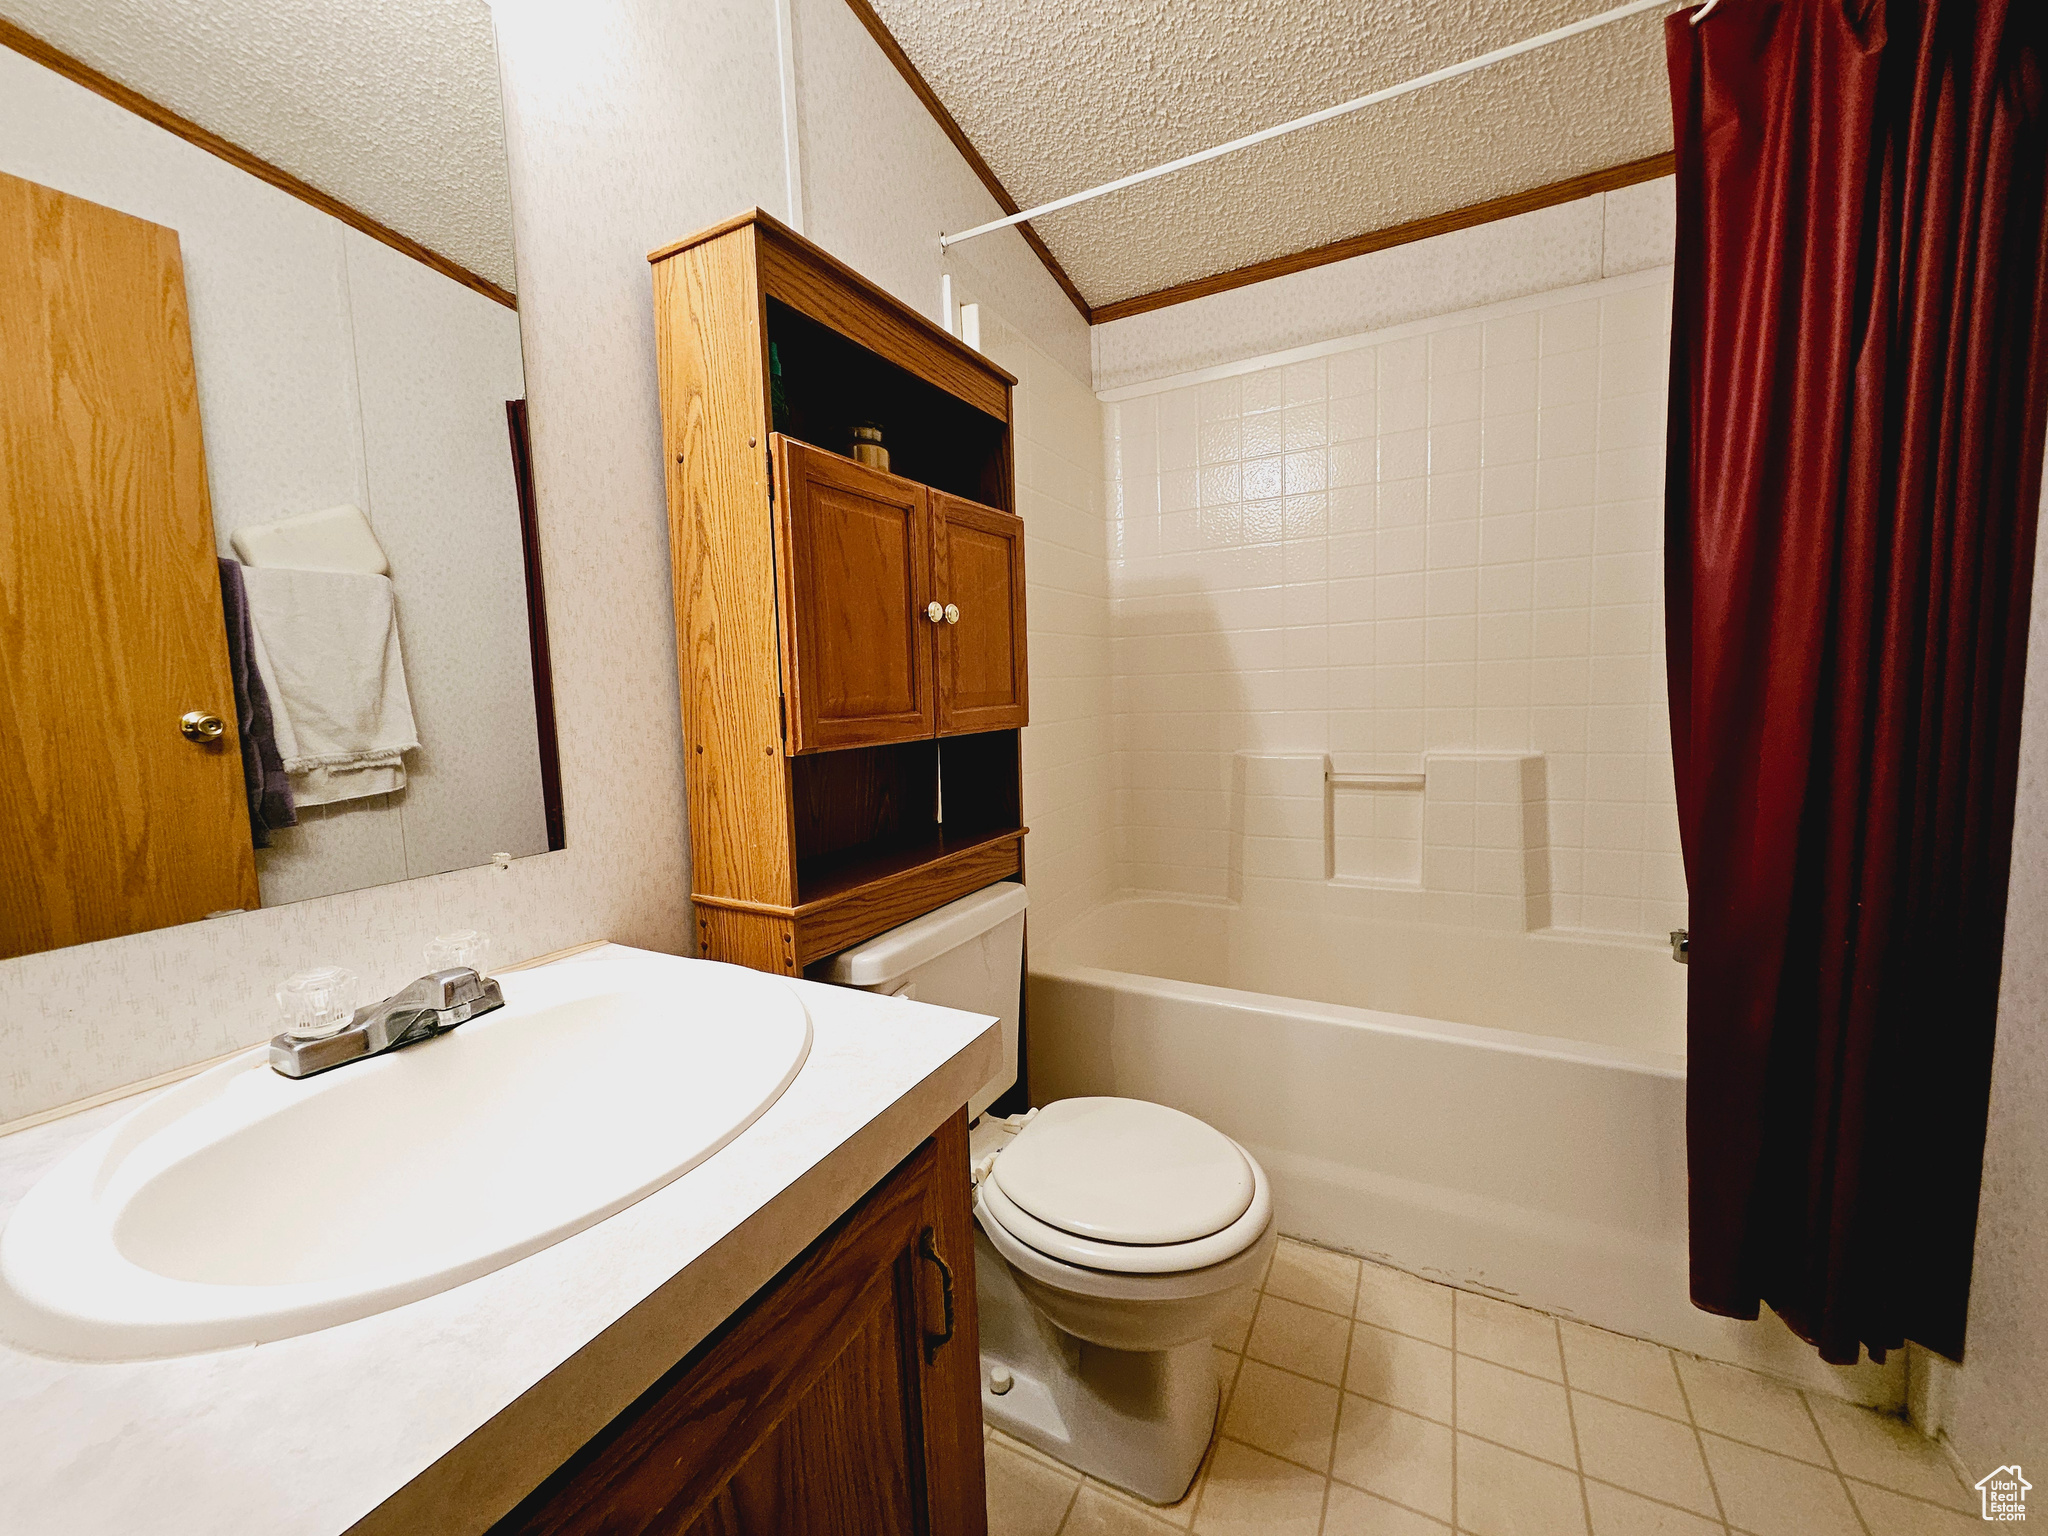 Full bathroom featuring a textured ceiling, tile floors, vanity, toilet, and shower / tub combo